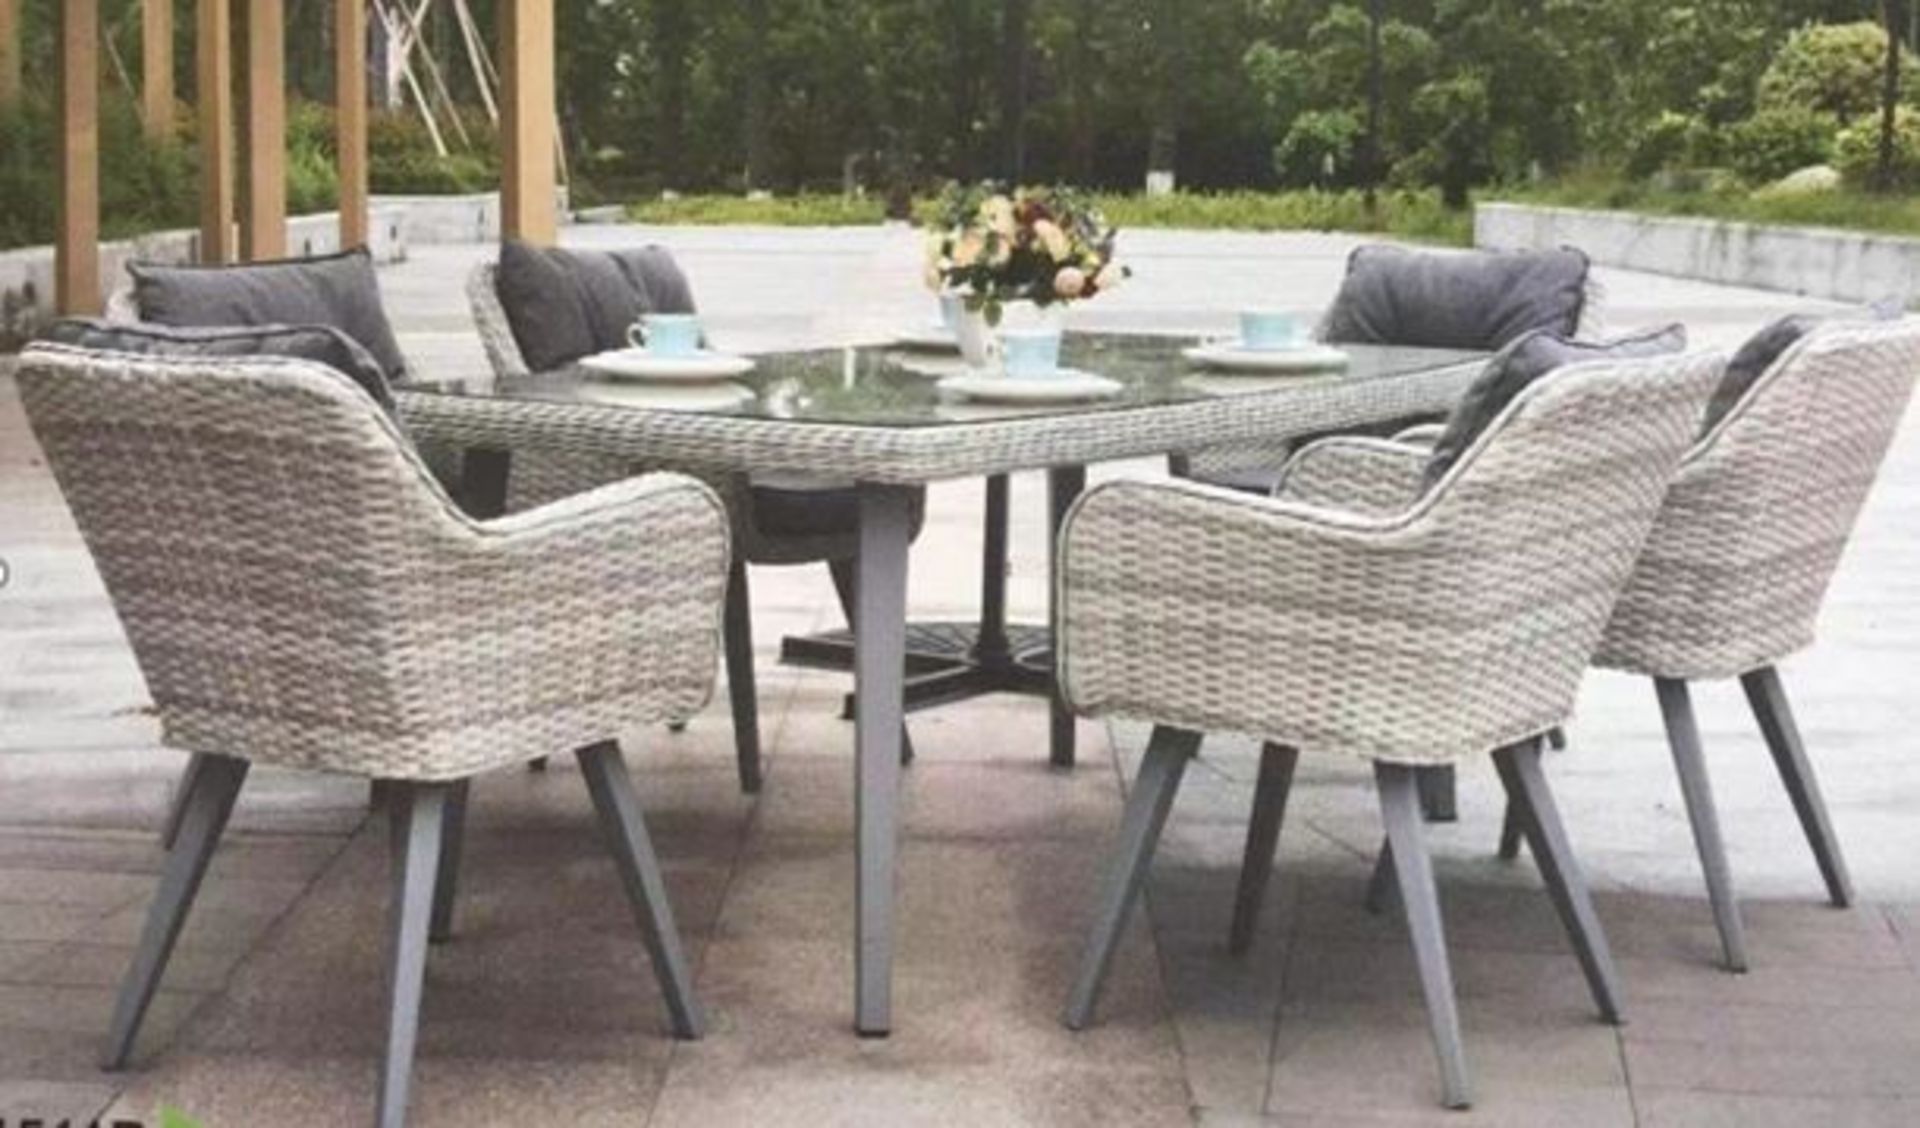 NEW 2019 Hardingham 7 Piece Contemporary All Weather Dining Set